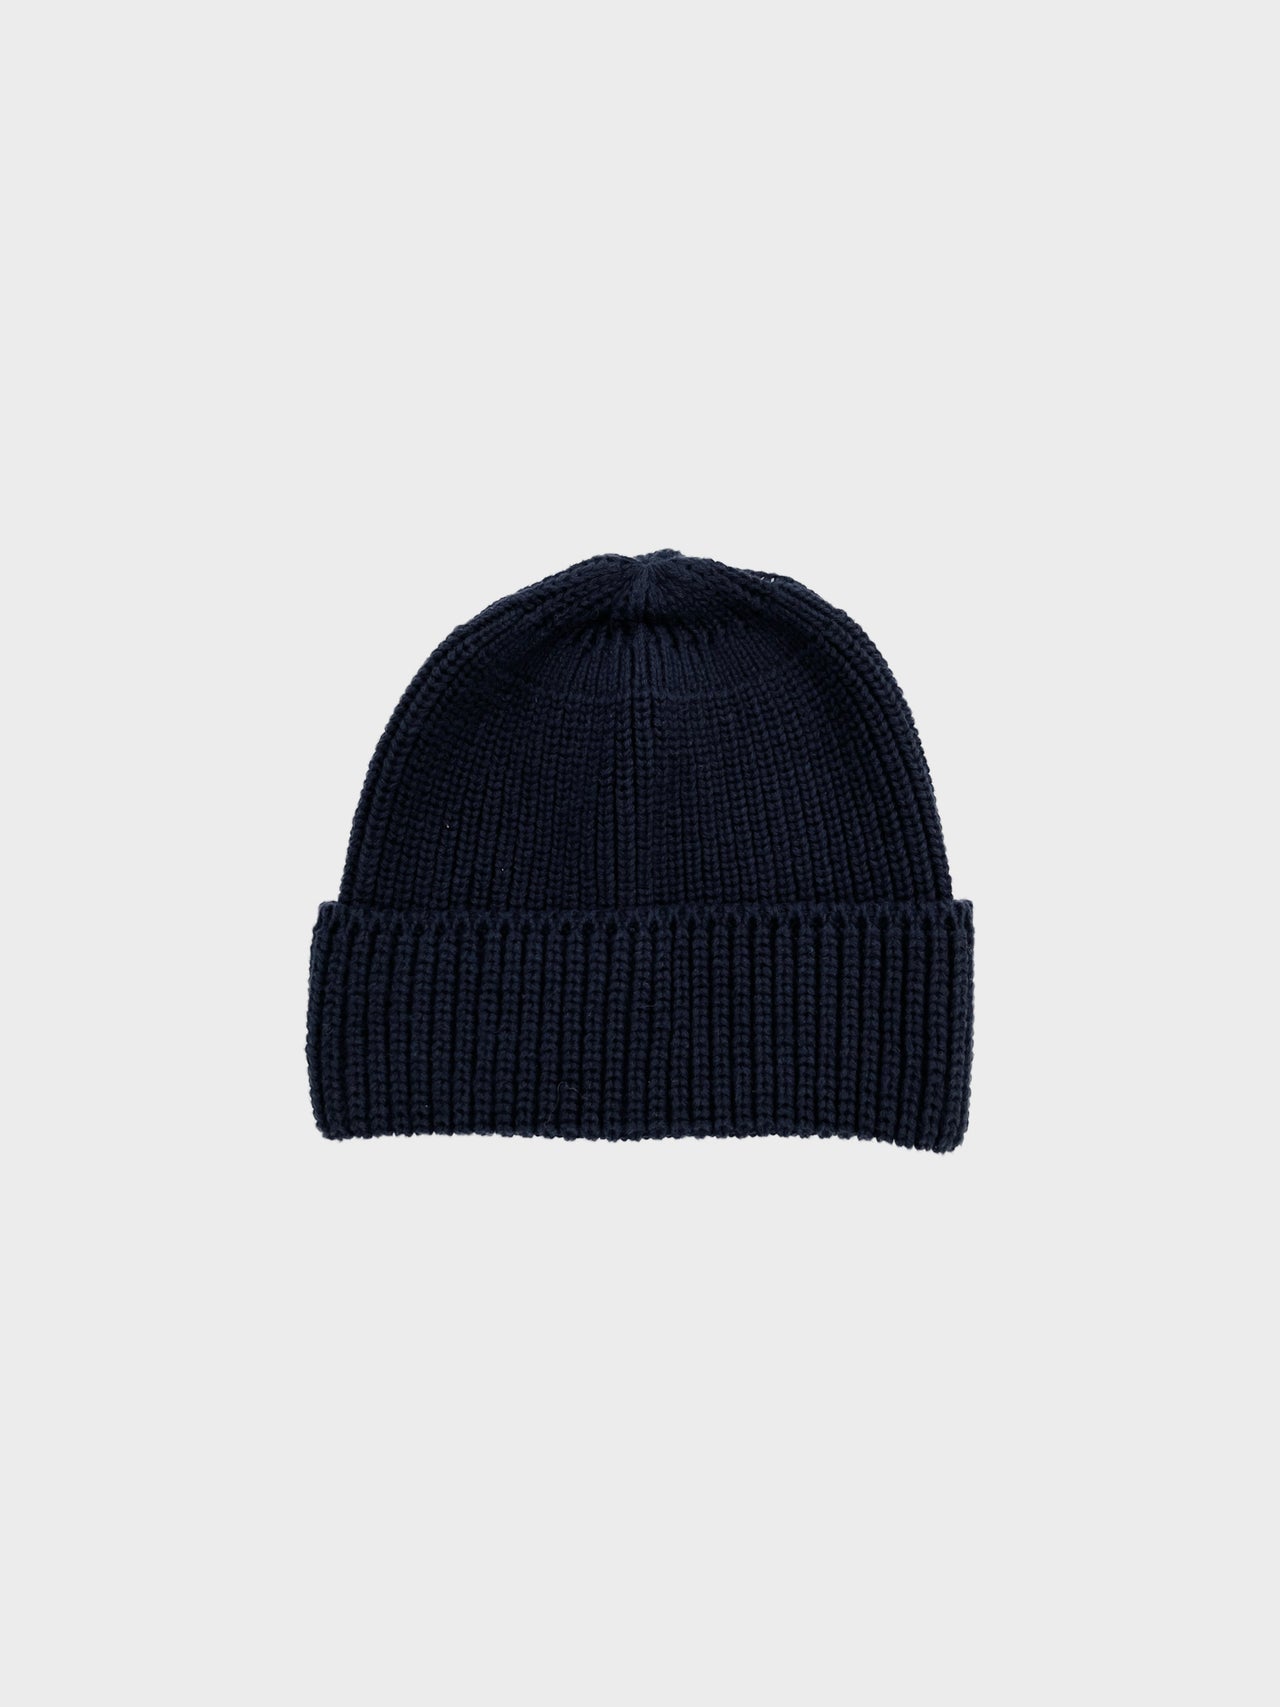 THE DAY / COTTON KNIT CAP (NAVY)